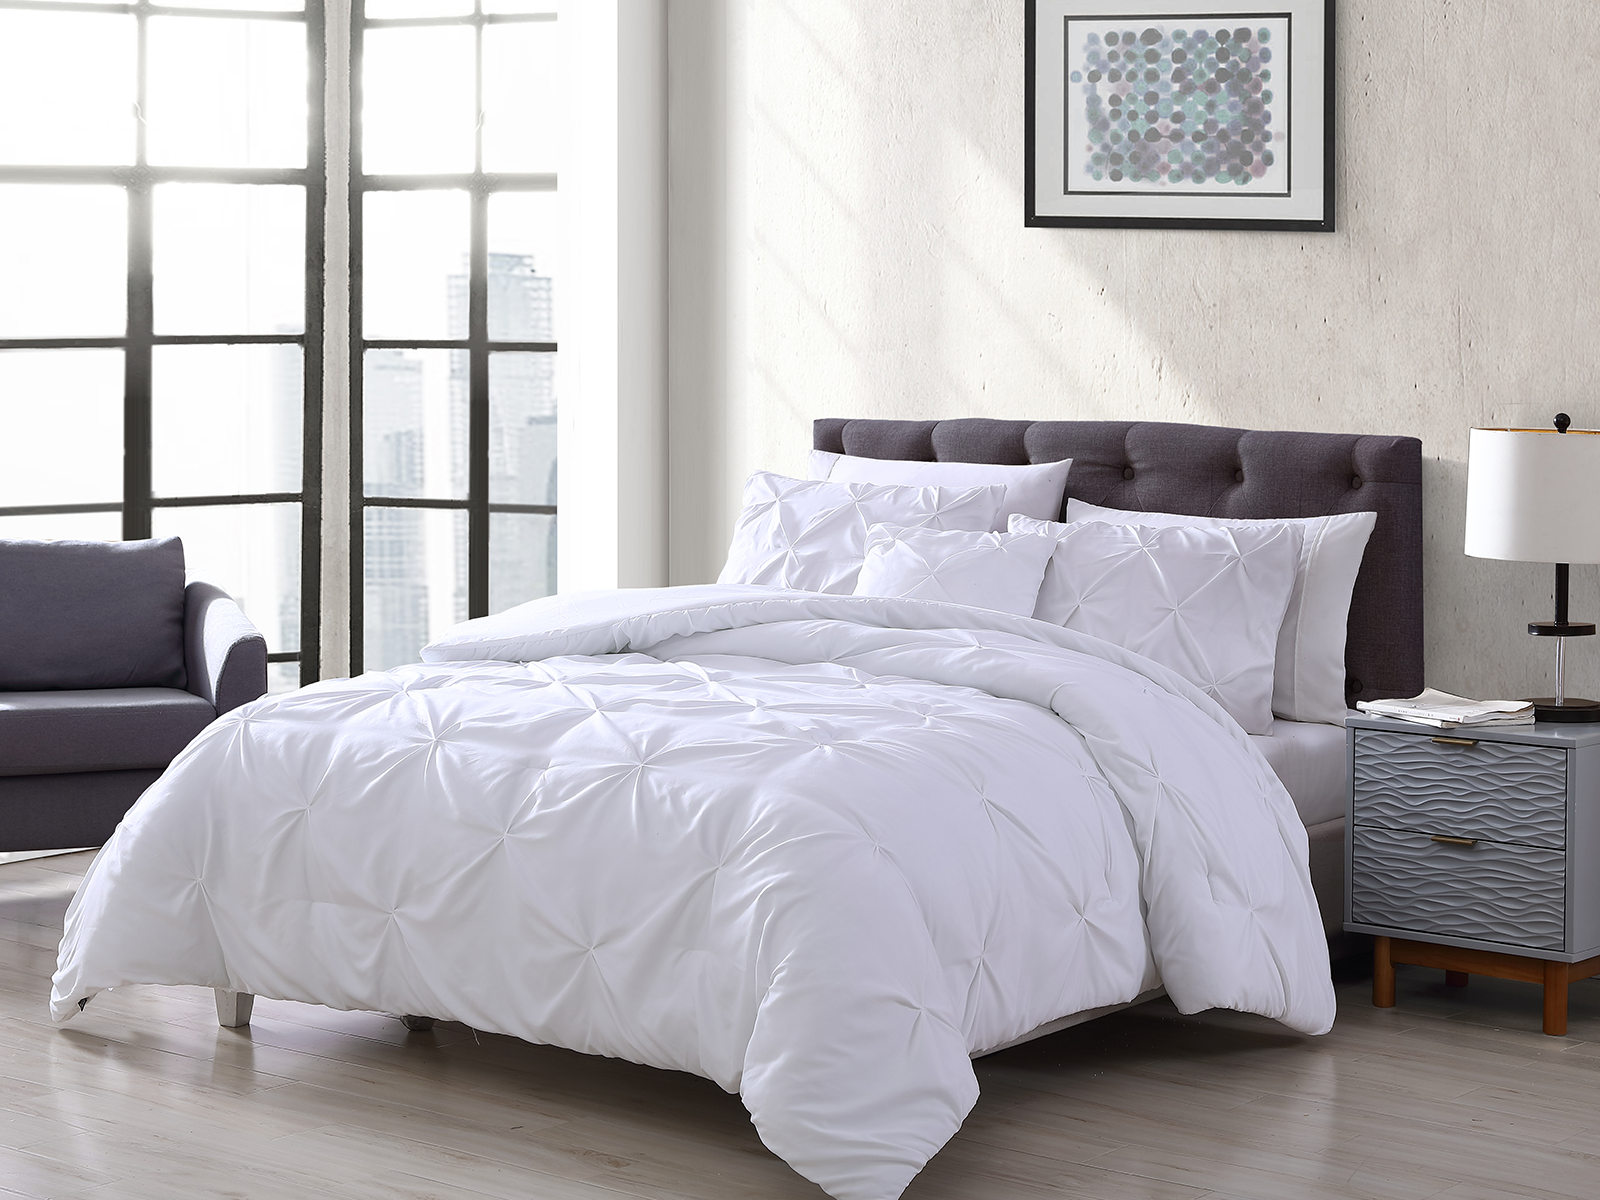 The Nesting Company Queen Spruce Comforter Set | White